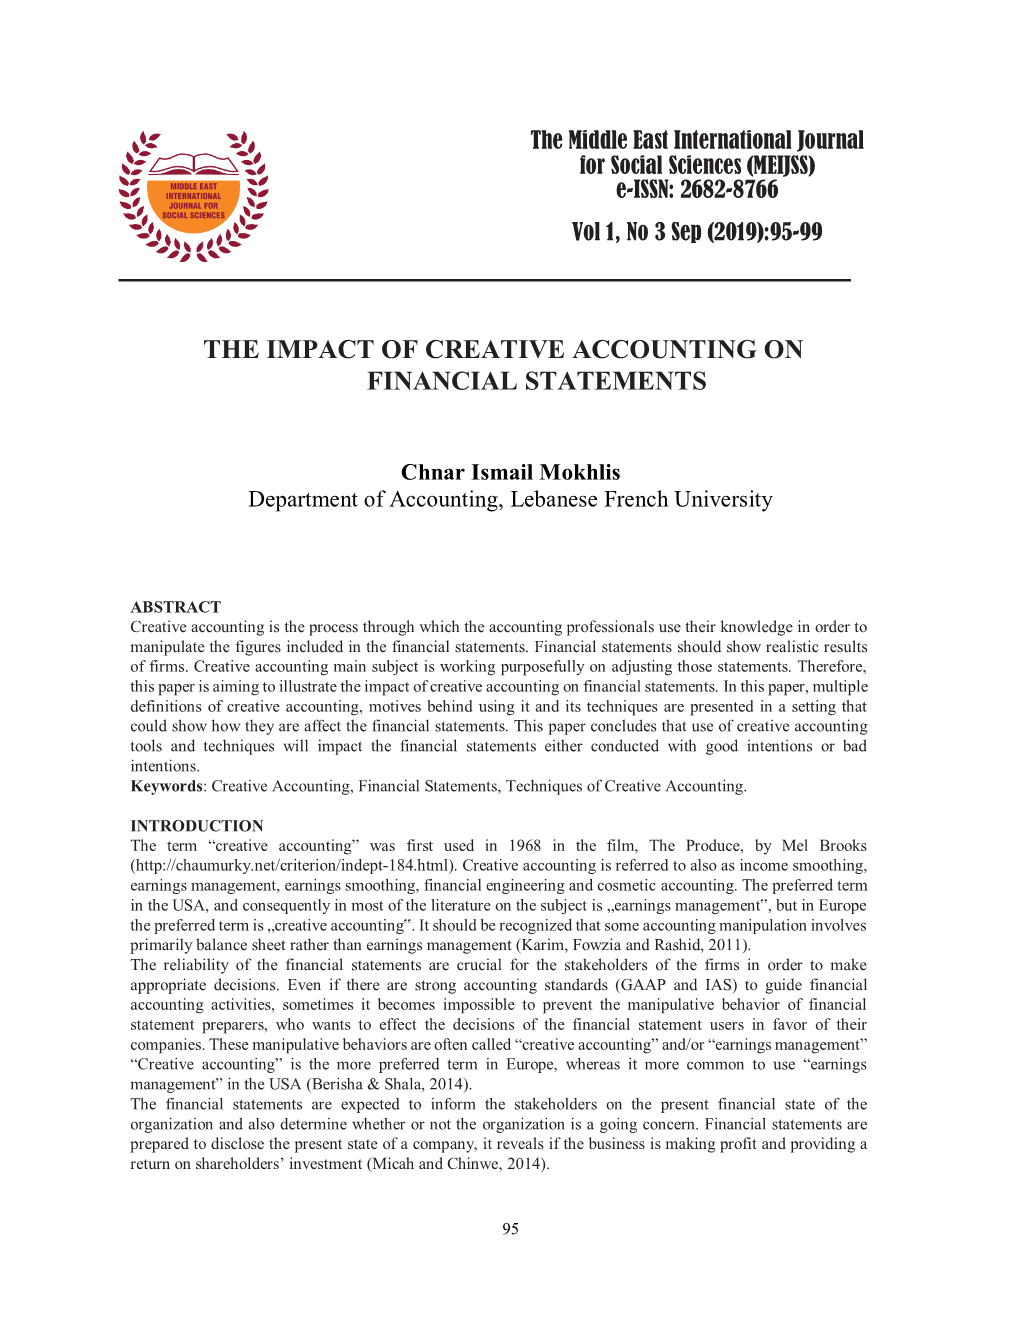 The Impact of Creative Accounting on Financial Statements